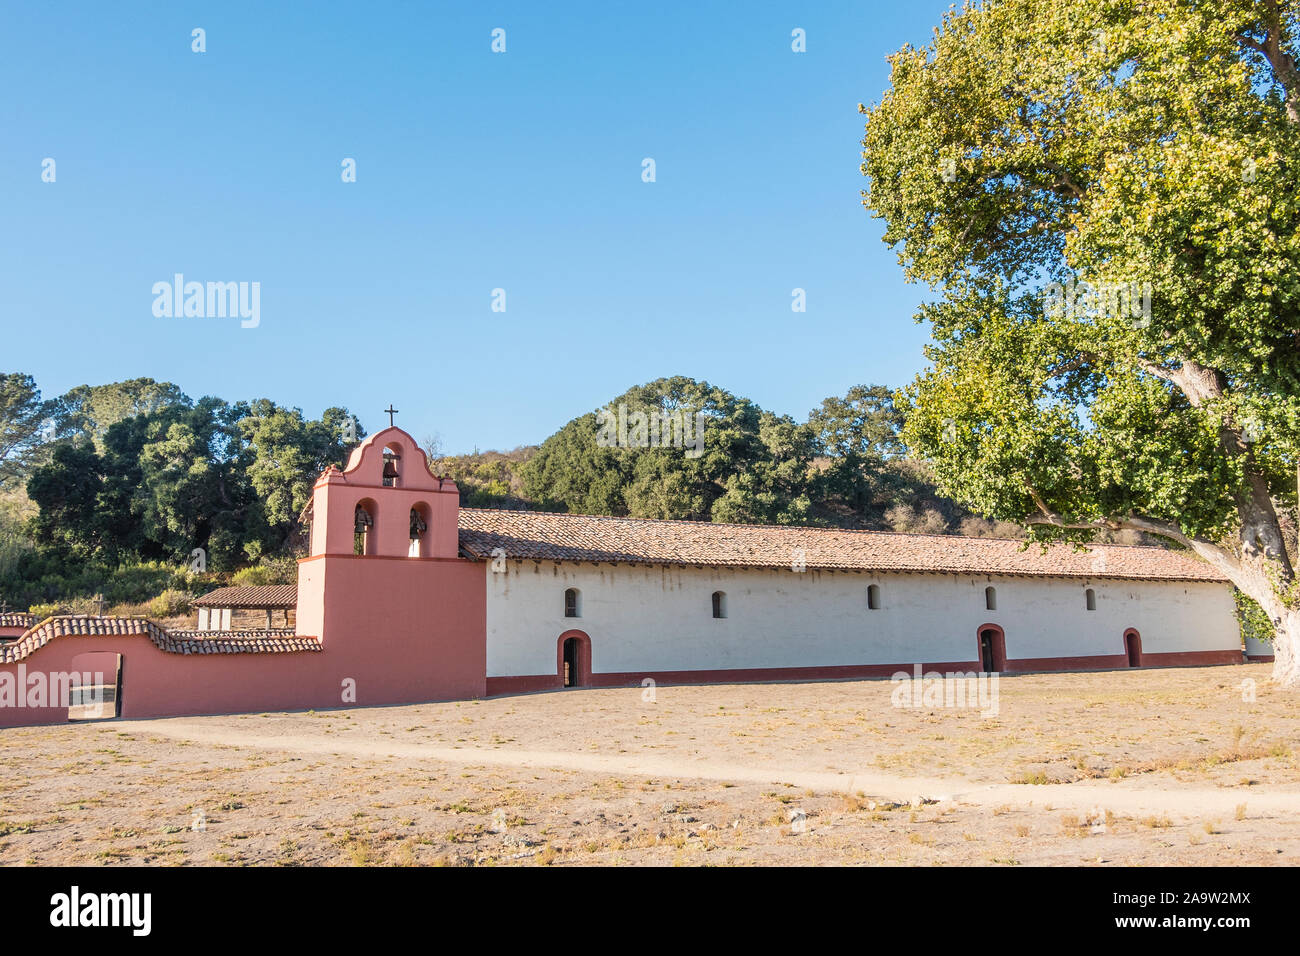 Mission La Purisima Concepción is a Spanish mission in Lompoc, California. It was established on December 8, 1787. Stock Photo